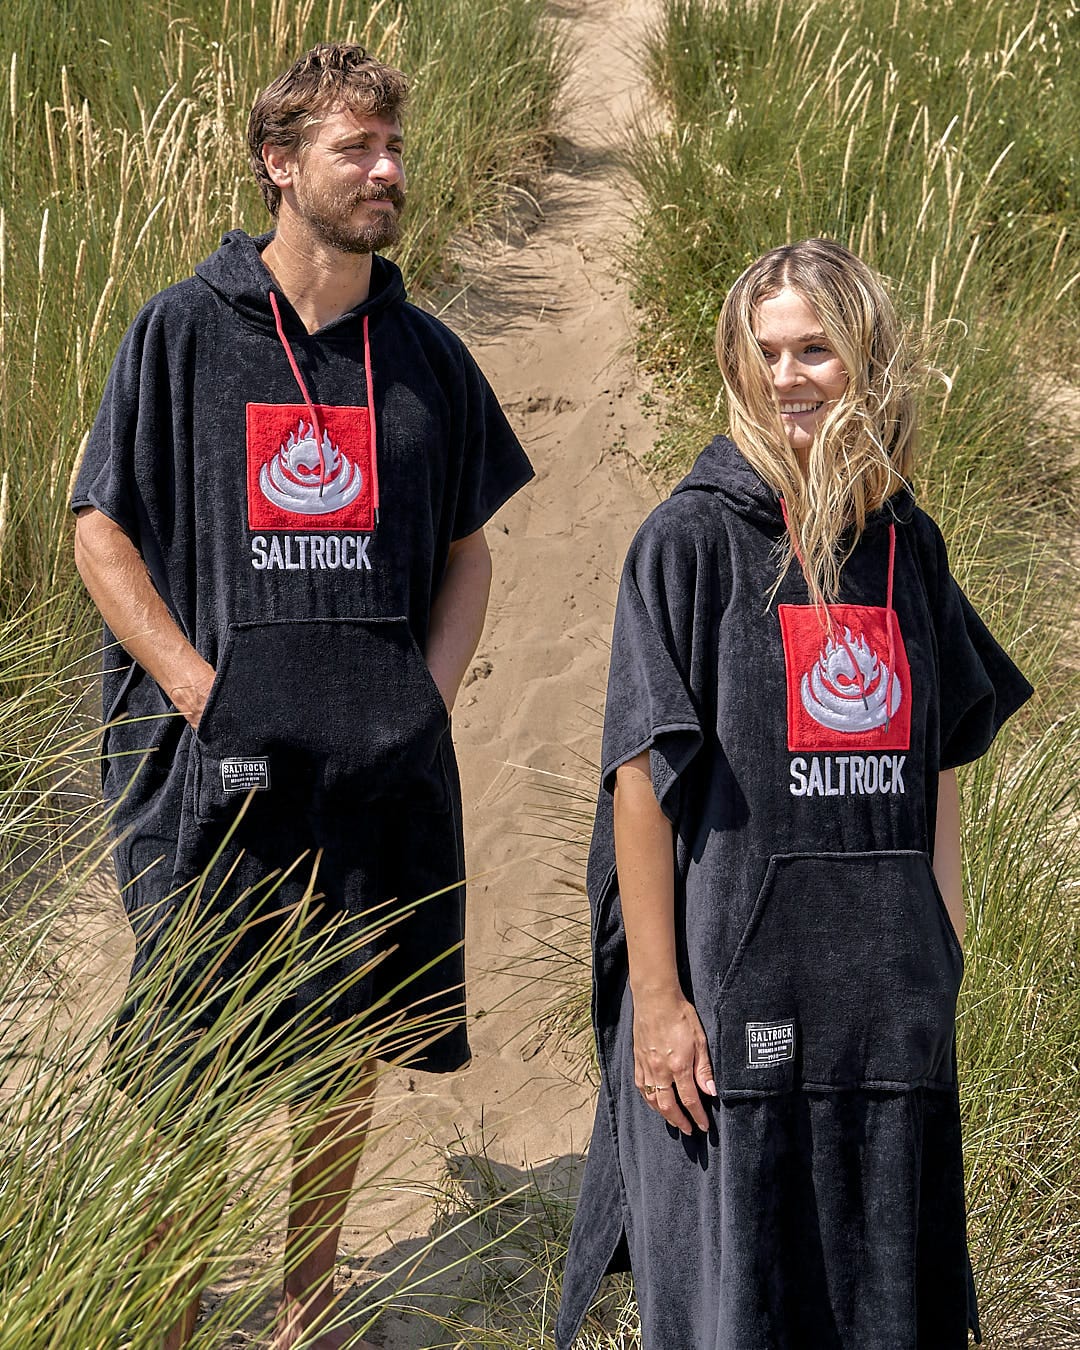 Two individuals wearing Saltrock Corp Changing Towel - Black hooded beach towels stand on a sandy path surrounded by tall grass.